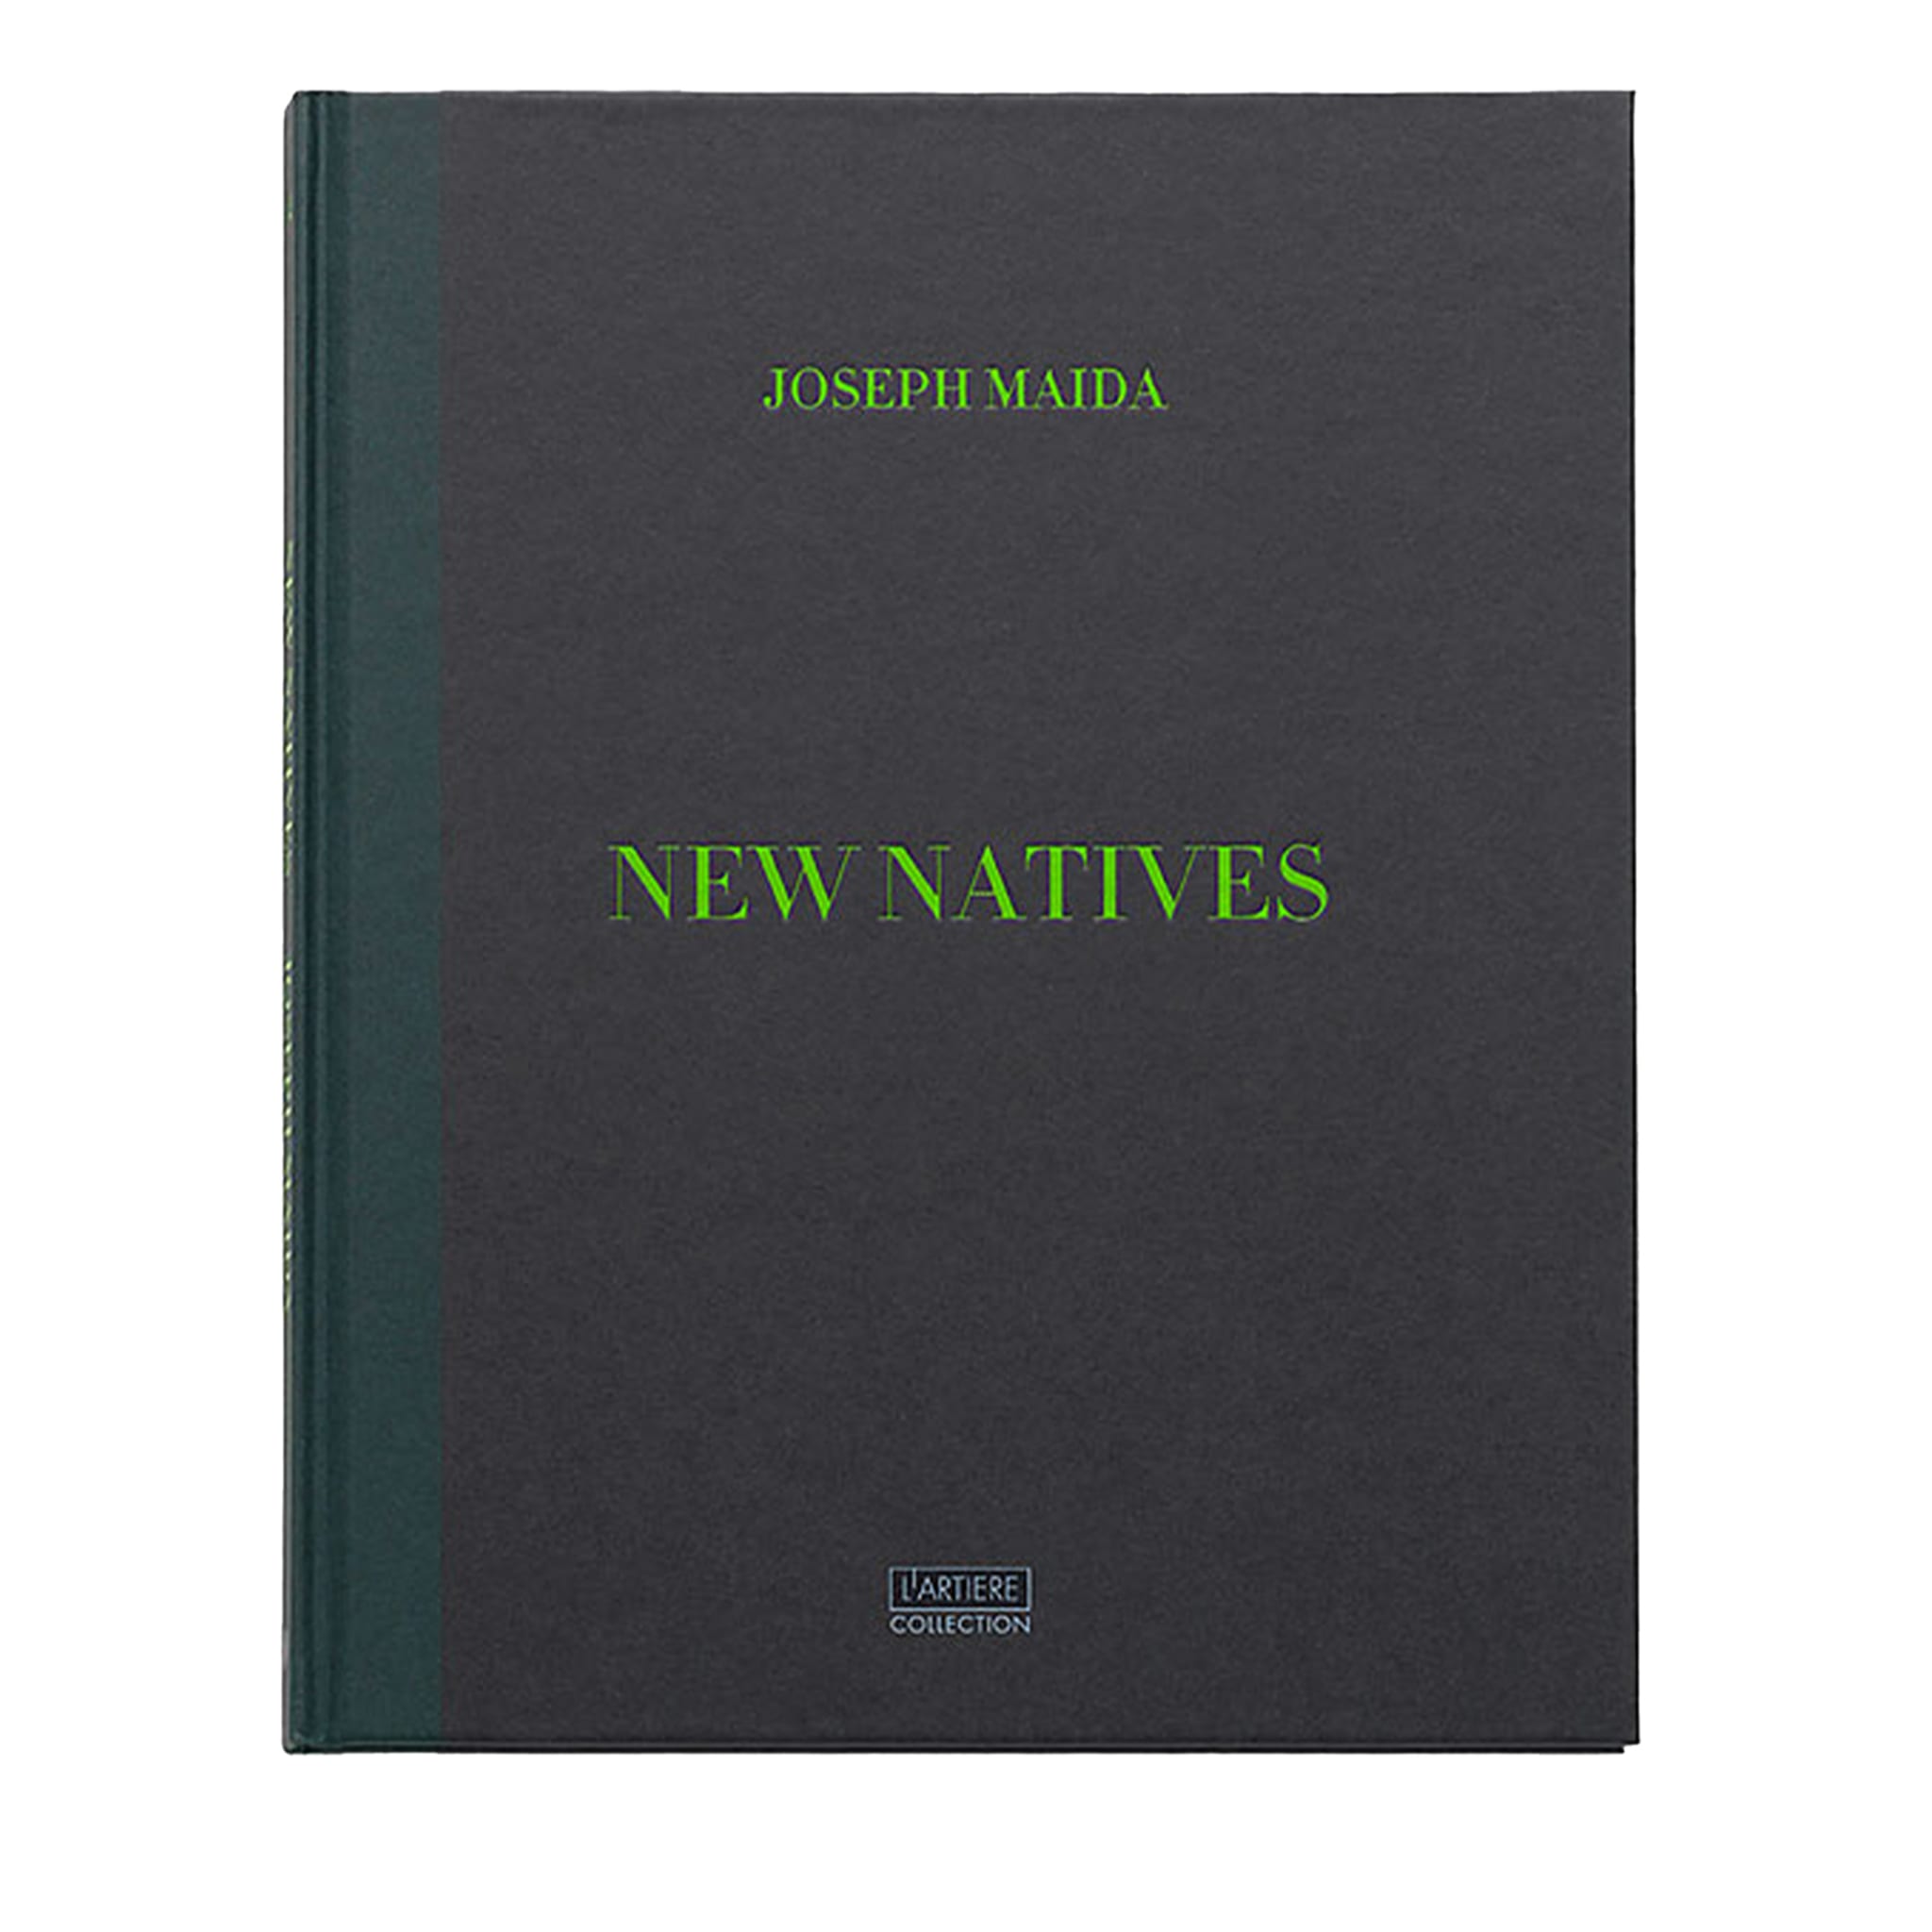 New Natives - Special Edition Box Set – Joseph Maida - Limited Edition of 25 copies - Main view